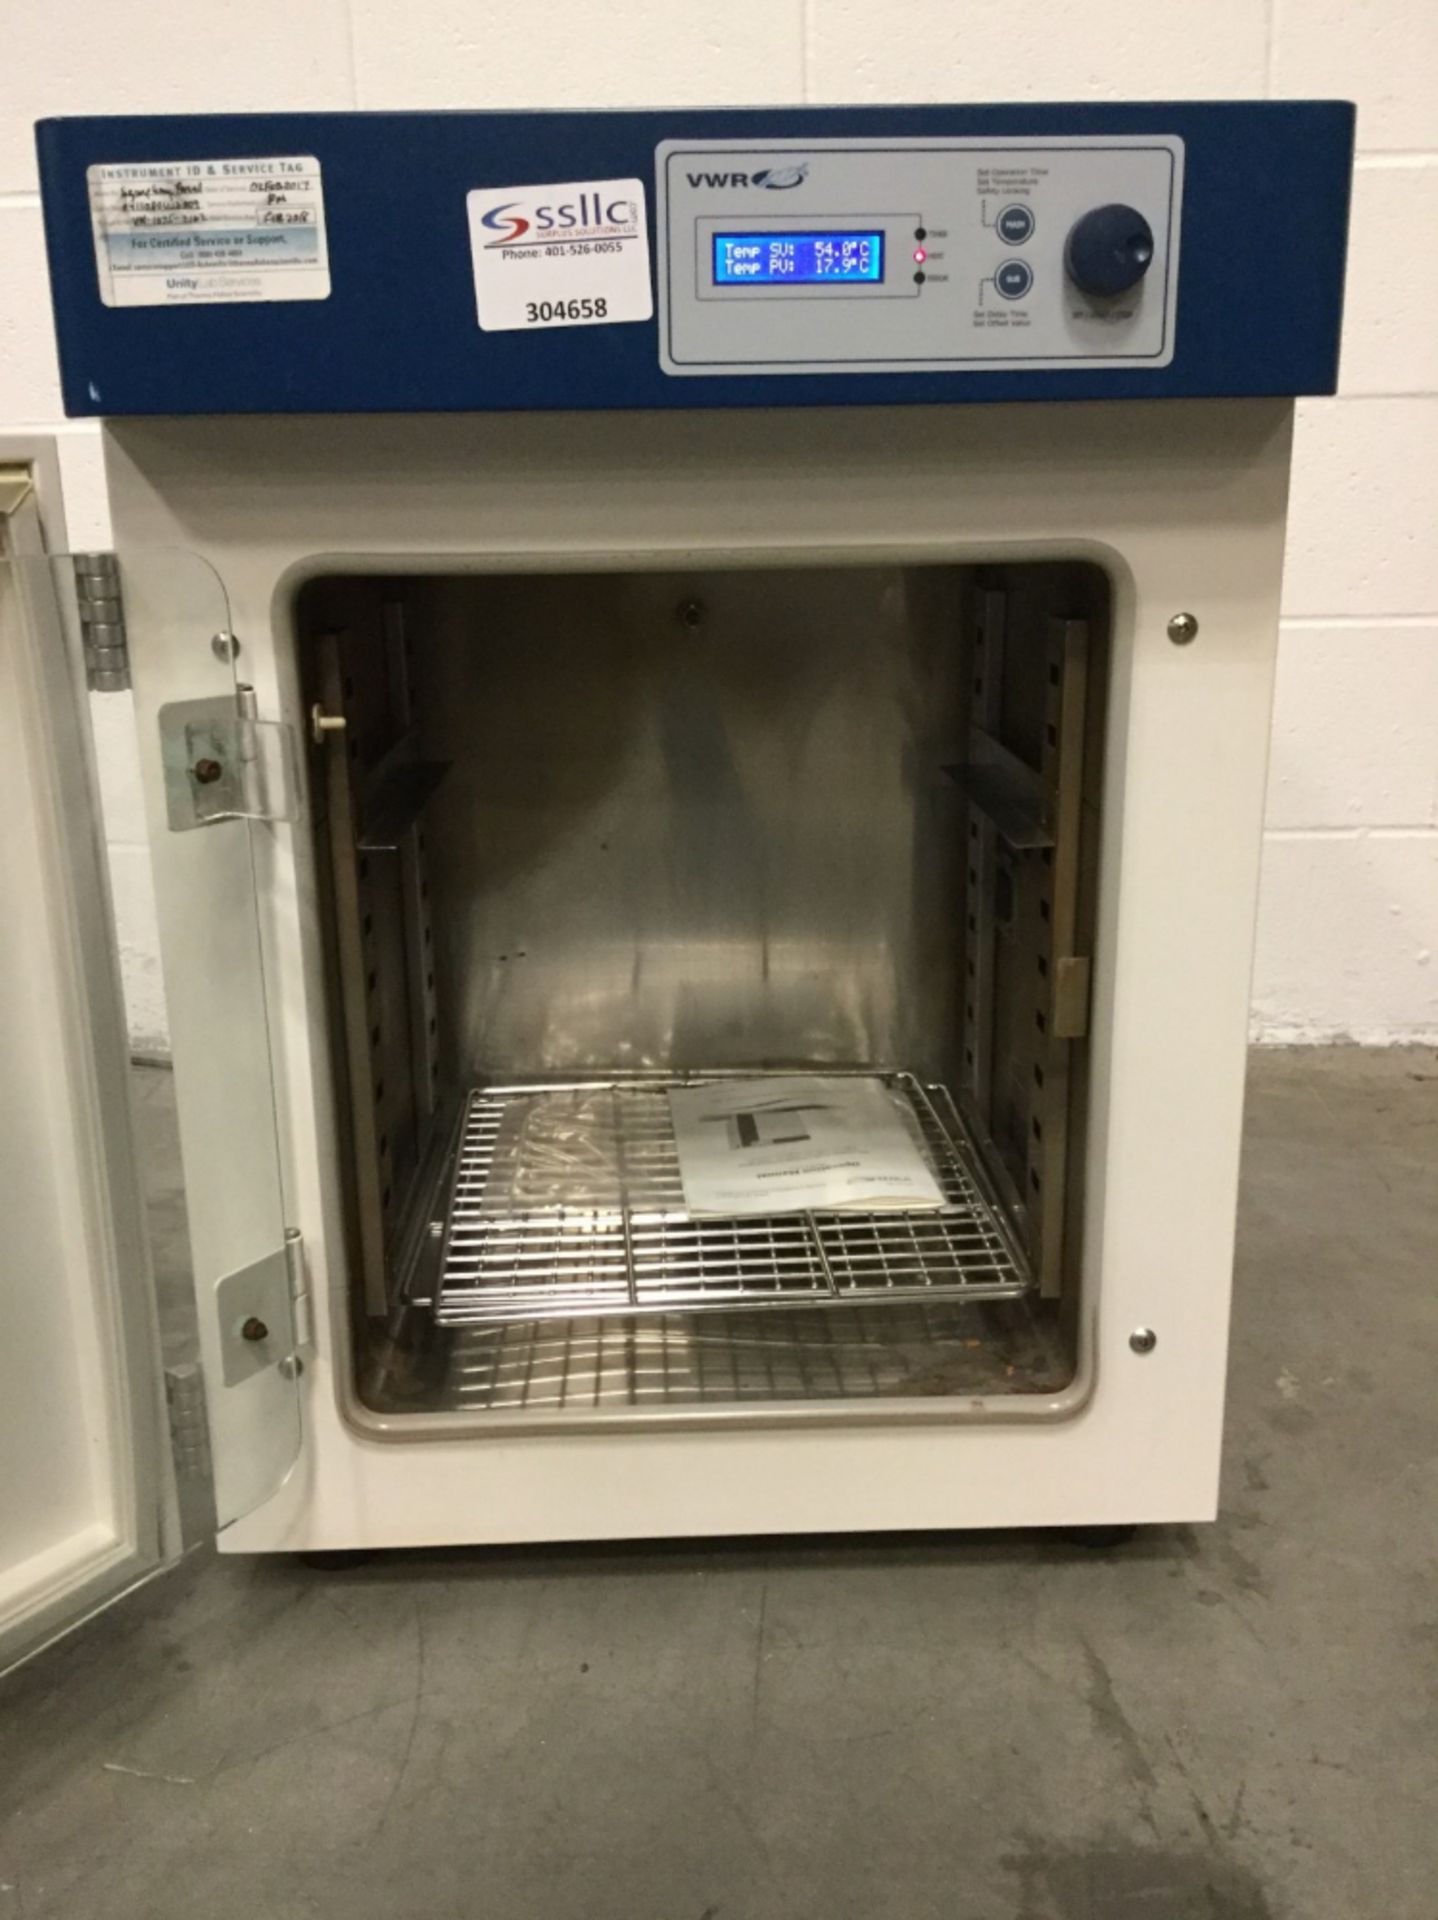 VWR Symphony Gravity Convection General Incubator - Image 3 of 3